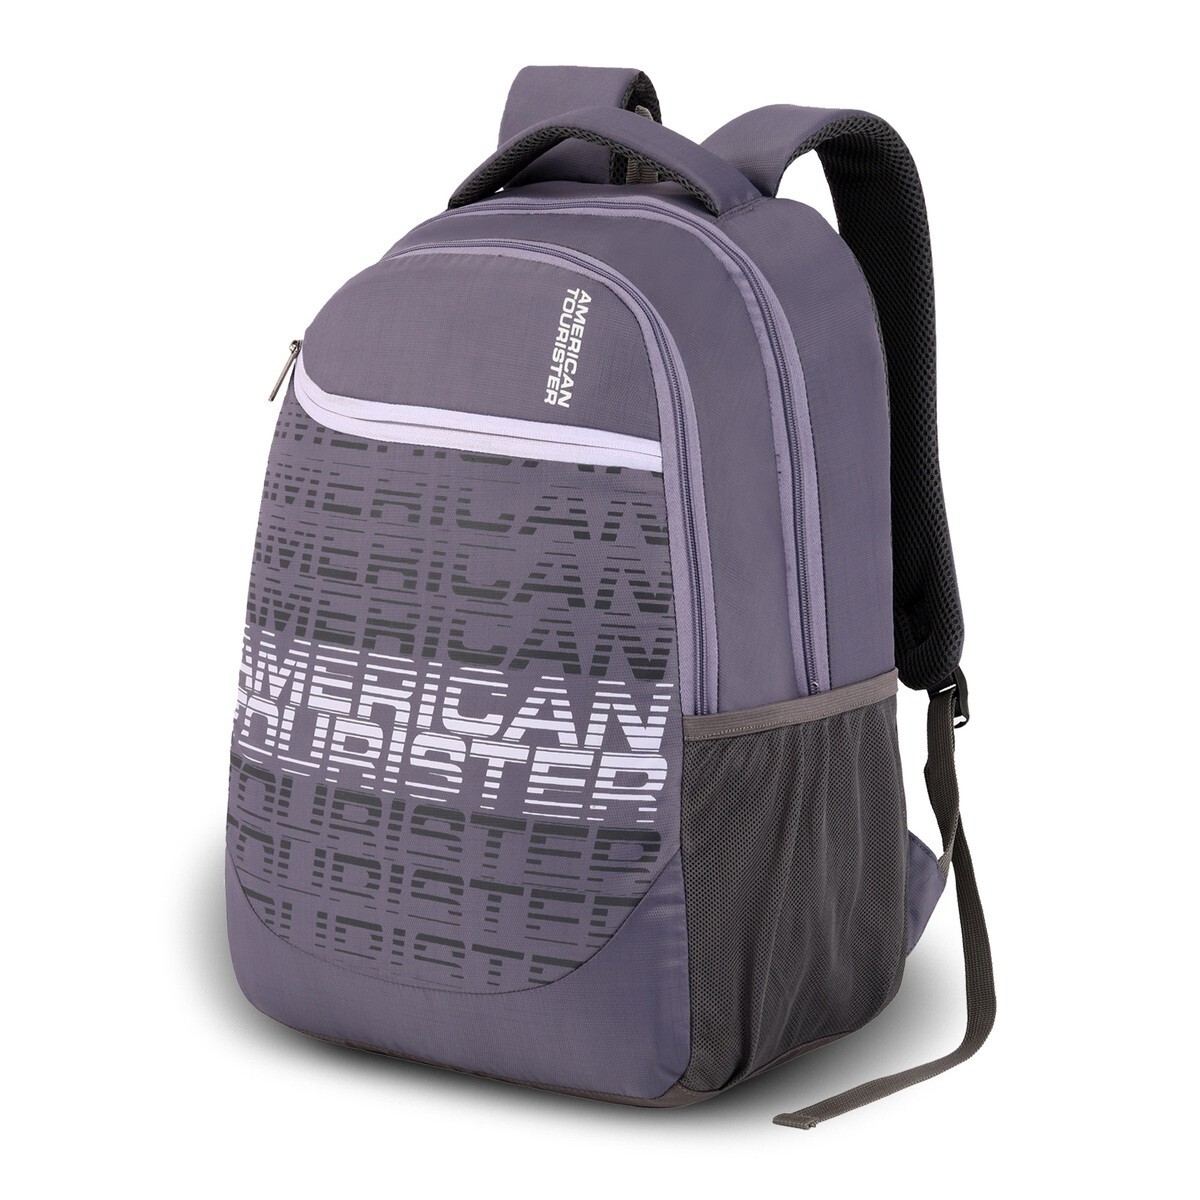 American Tourister BackPack Coco+ BP-02 Grey